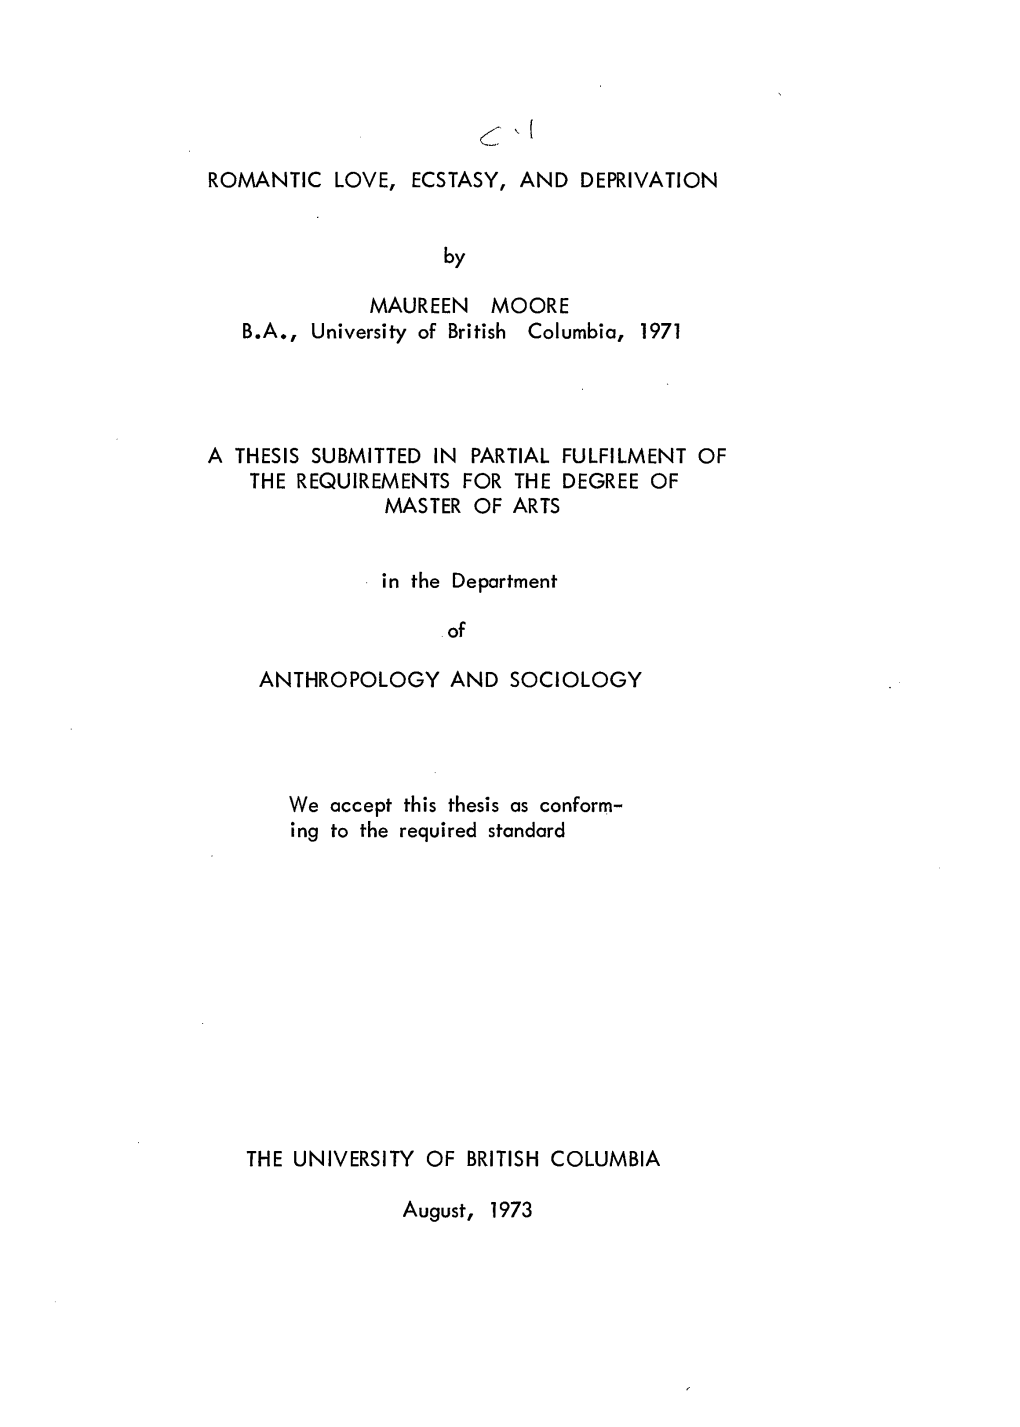 ROMANTIC LOVE, ECSTASY, and DEPRIVATION by MAUREEN MOORE B.A., University of British Columbia, 1971 a THESIS SUBMITTED in PARTIA